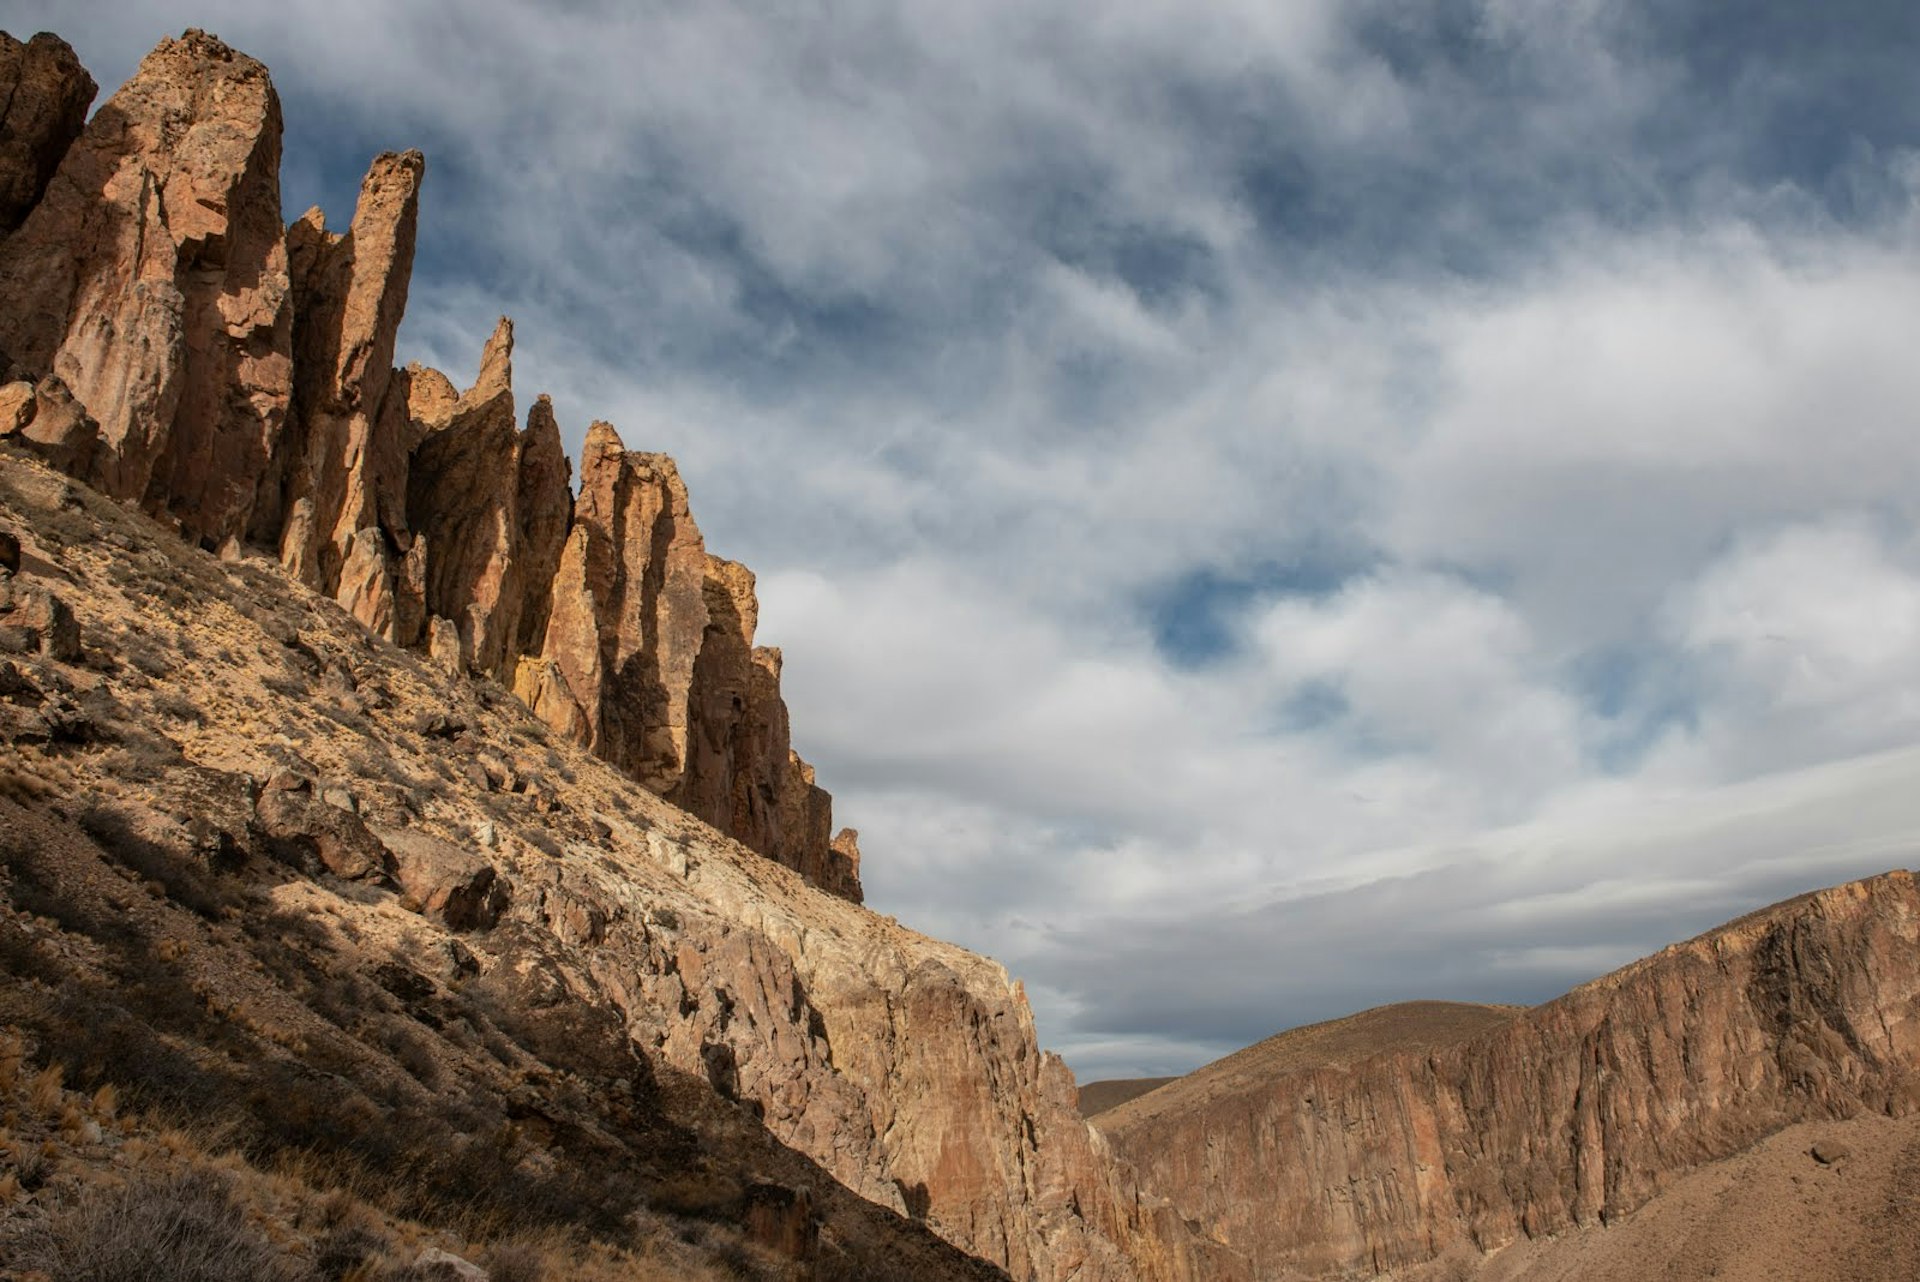 Rock formations under a cloudy sky in Cañadon Pinturas, of Argentina's Patagonia National Park